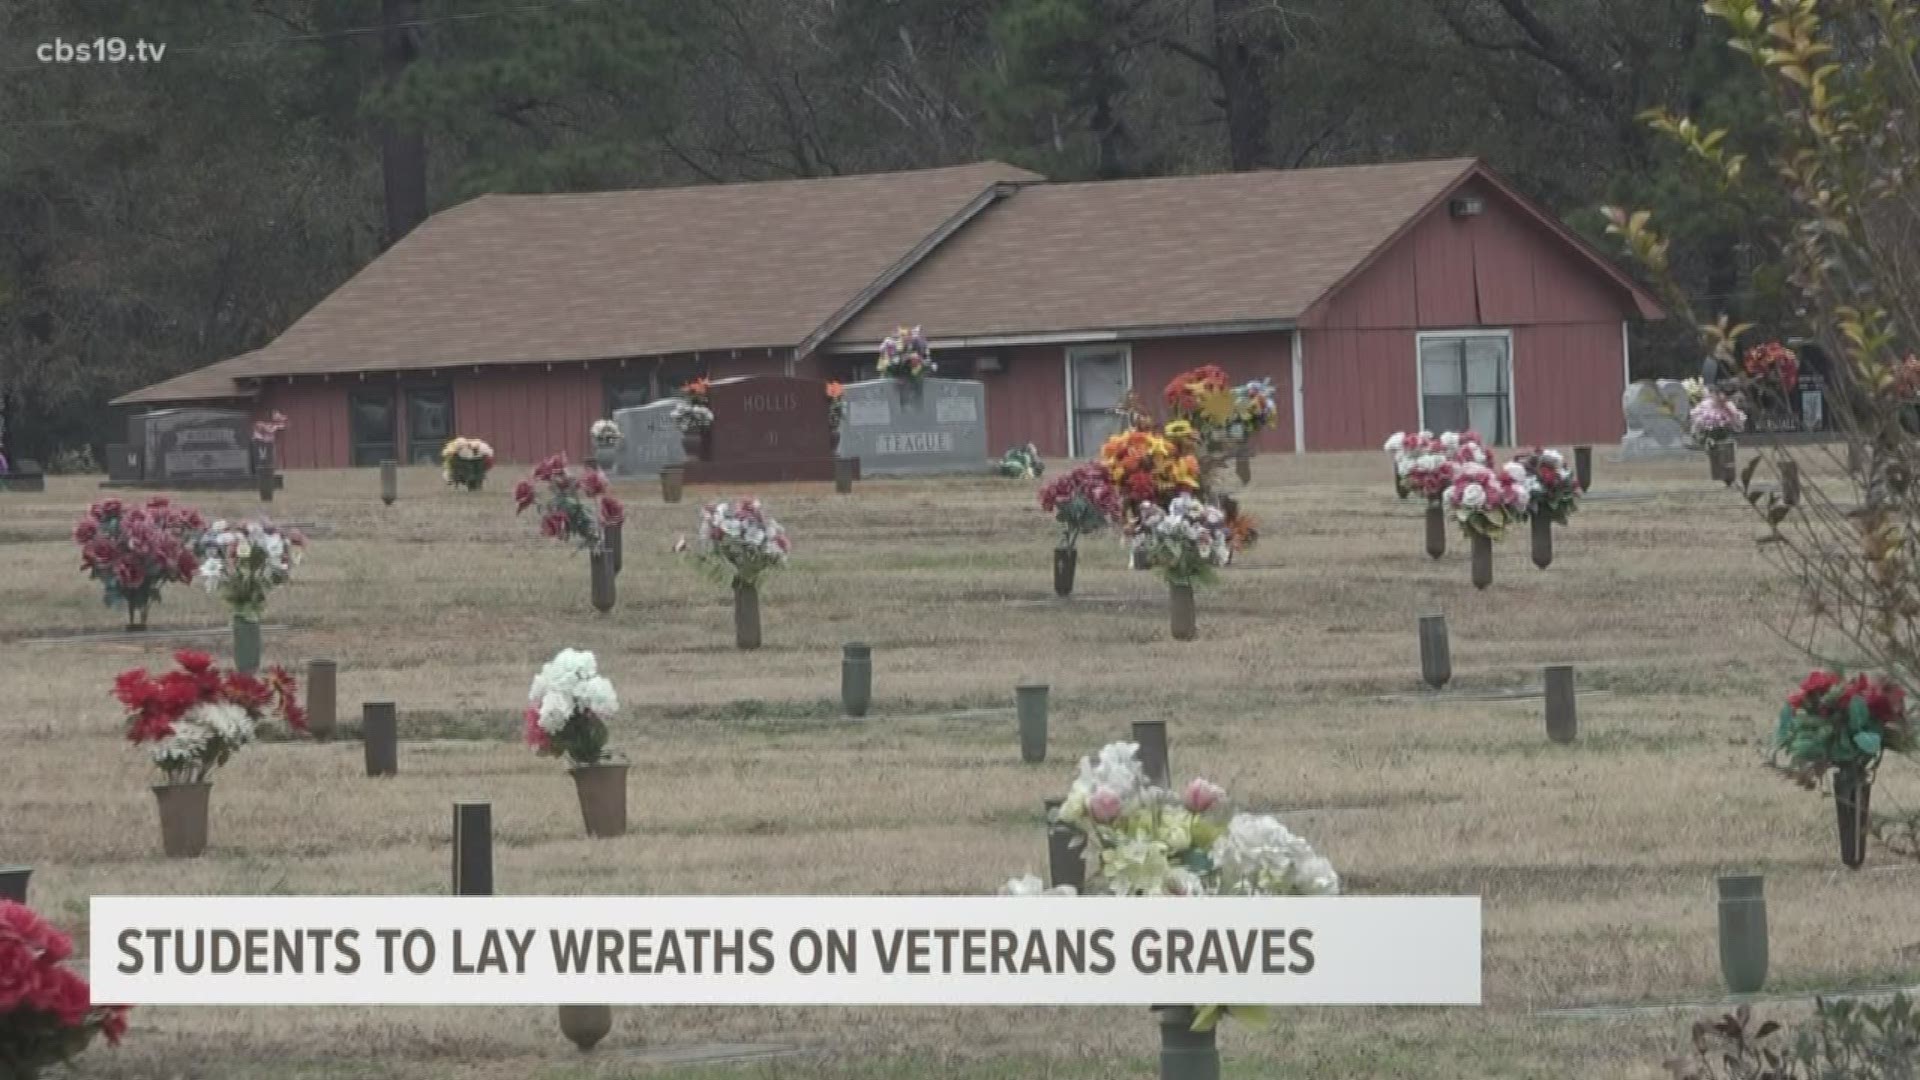 Students to lay wreaths on veterans graves